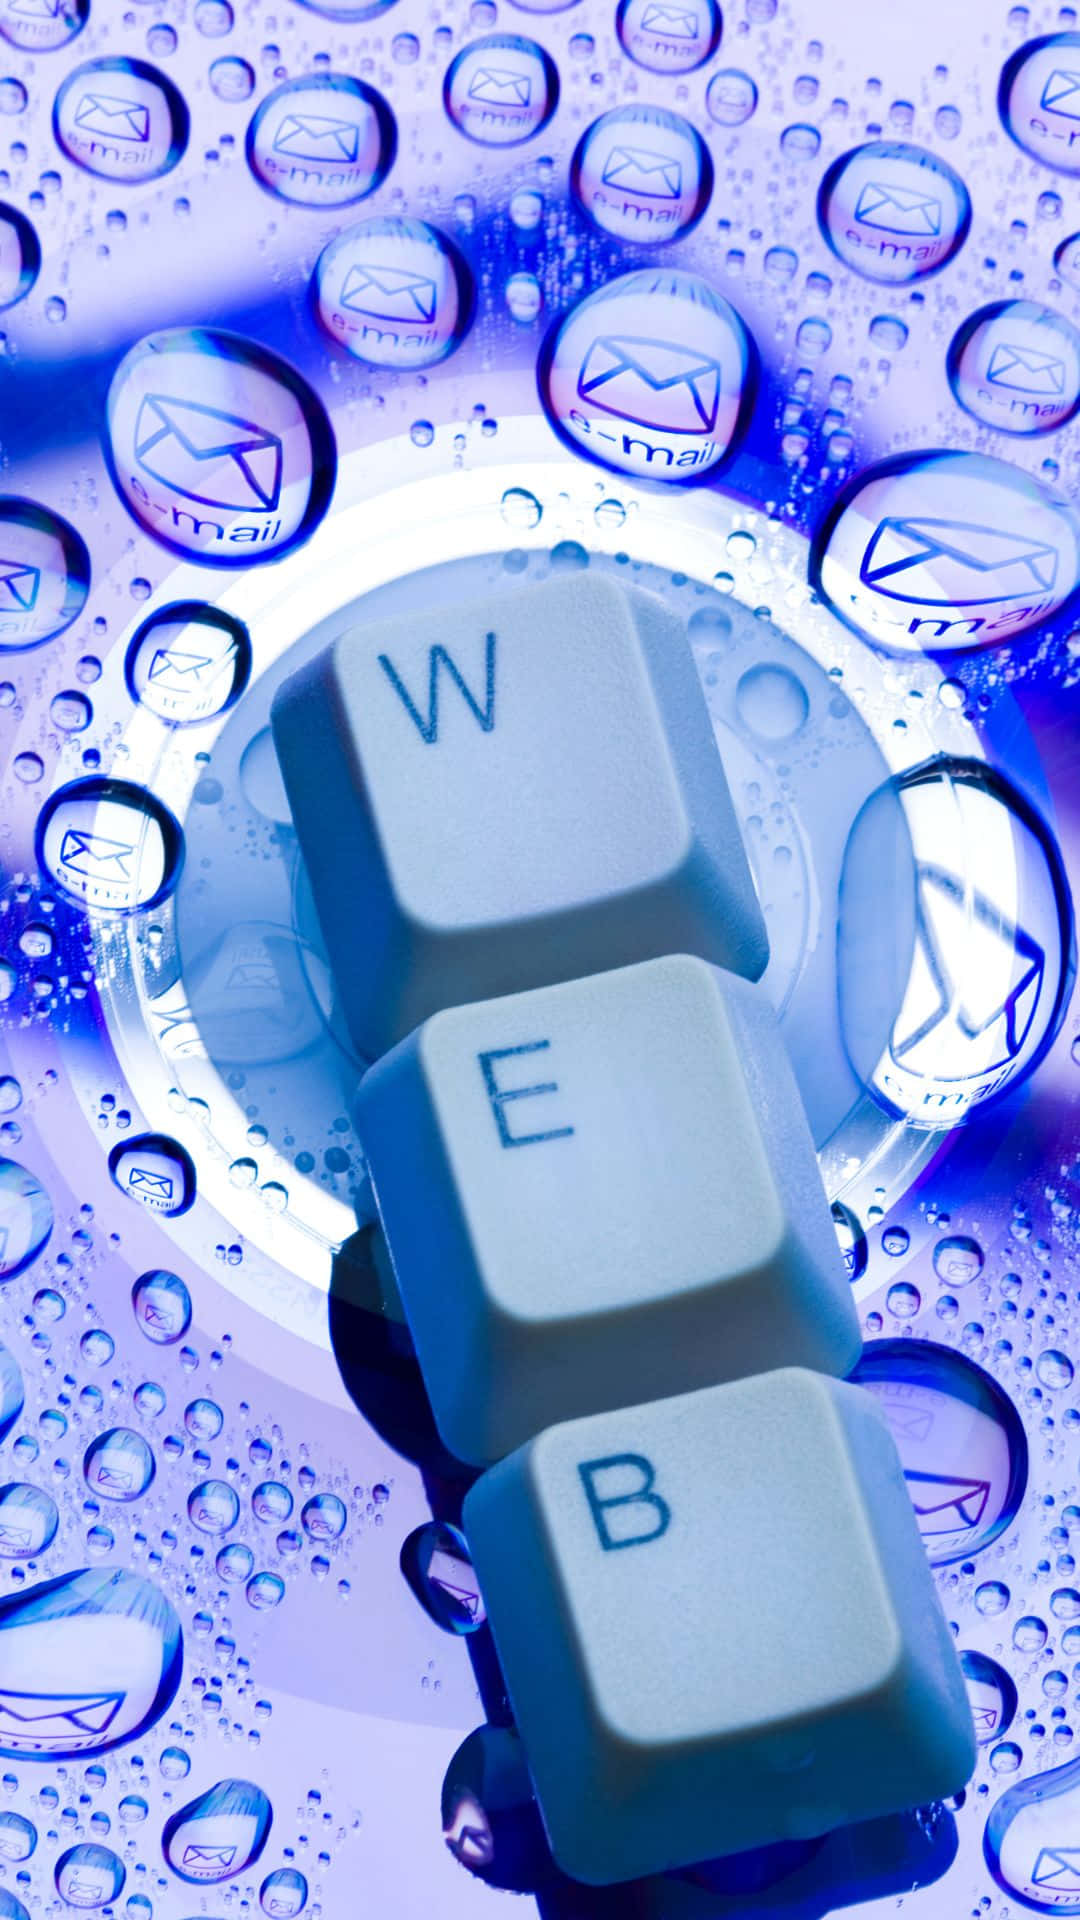 Web Connectivity Keyboard Concept Background